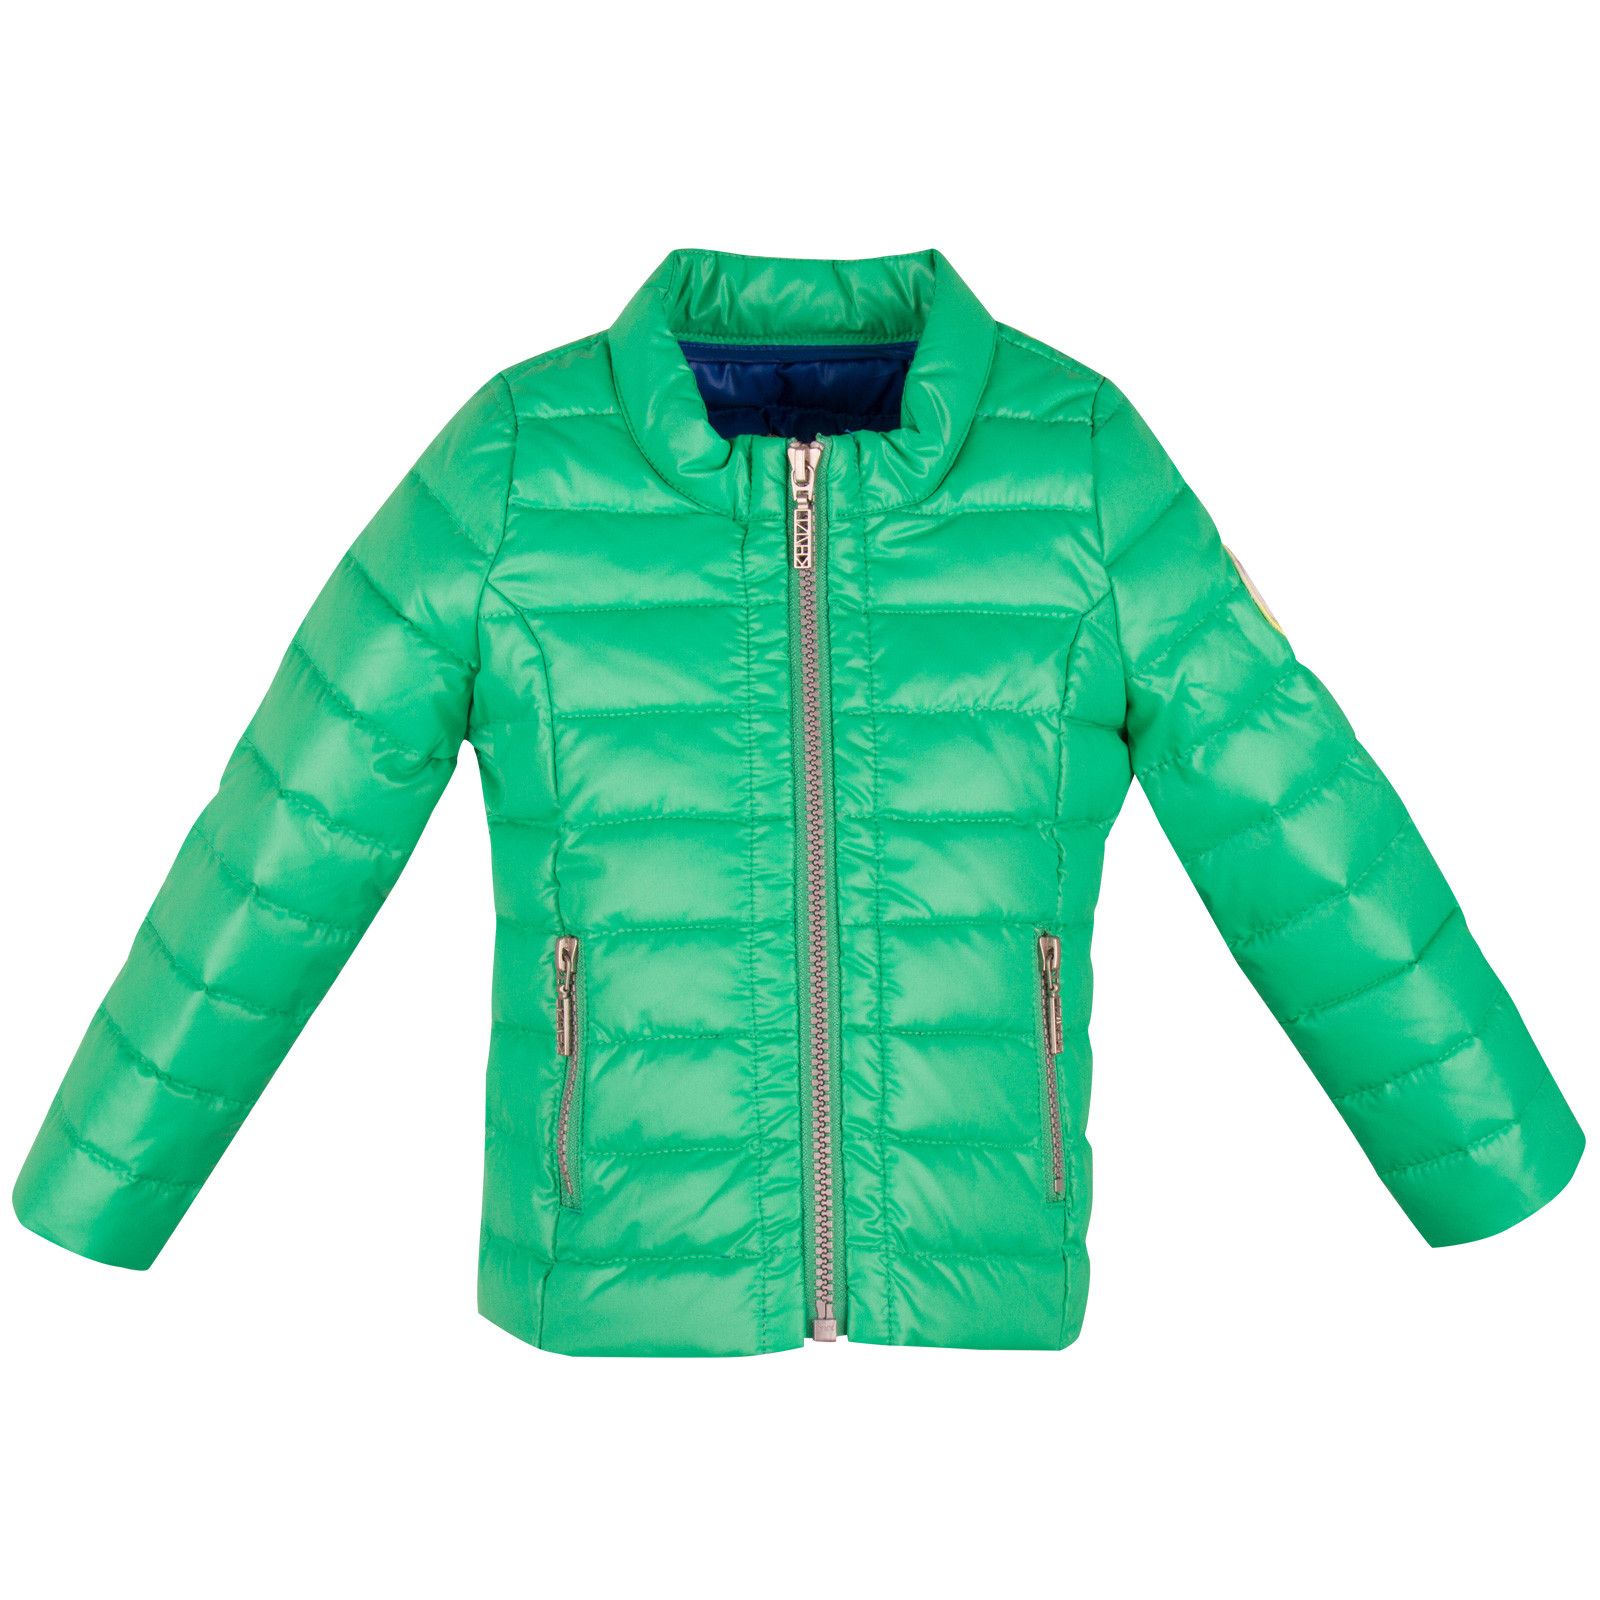 Girls Green Down Padded Jacket With Zipper Pockets - CÉMAROSE | Children's Fashion Store - 1